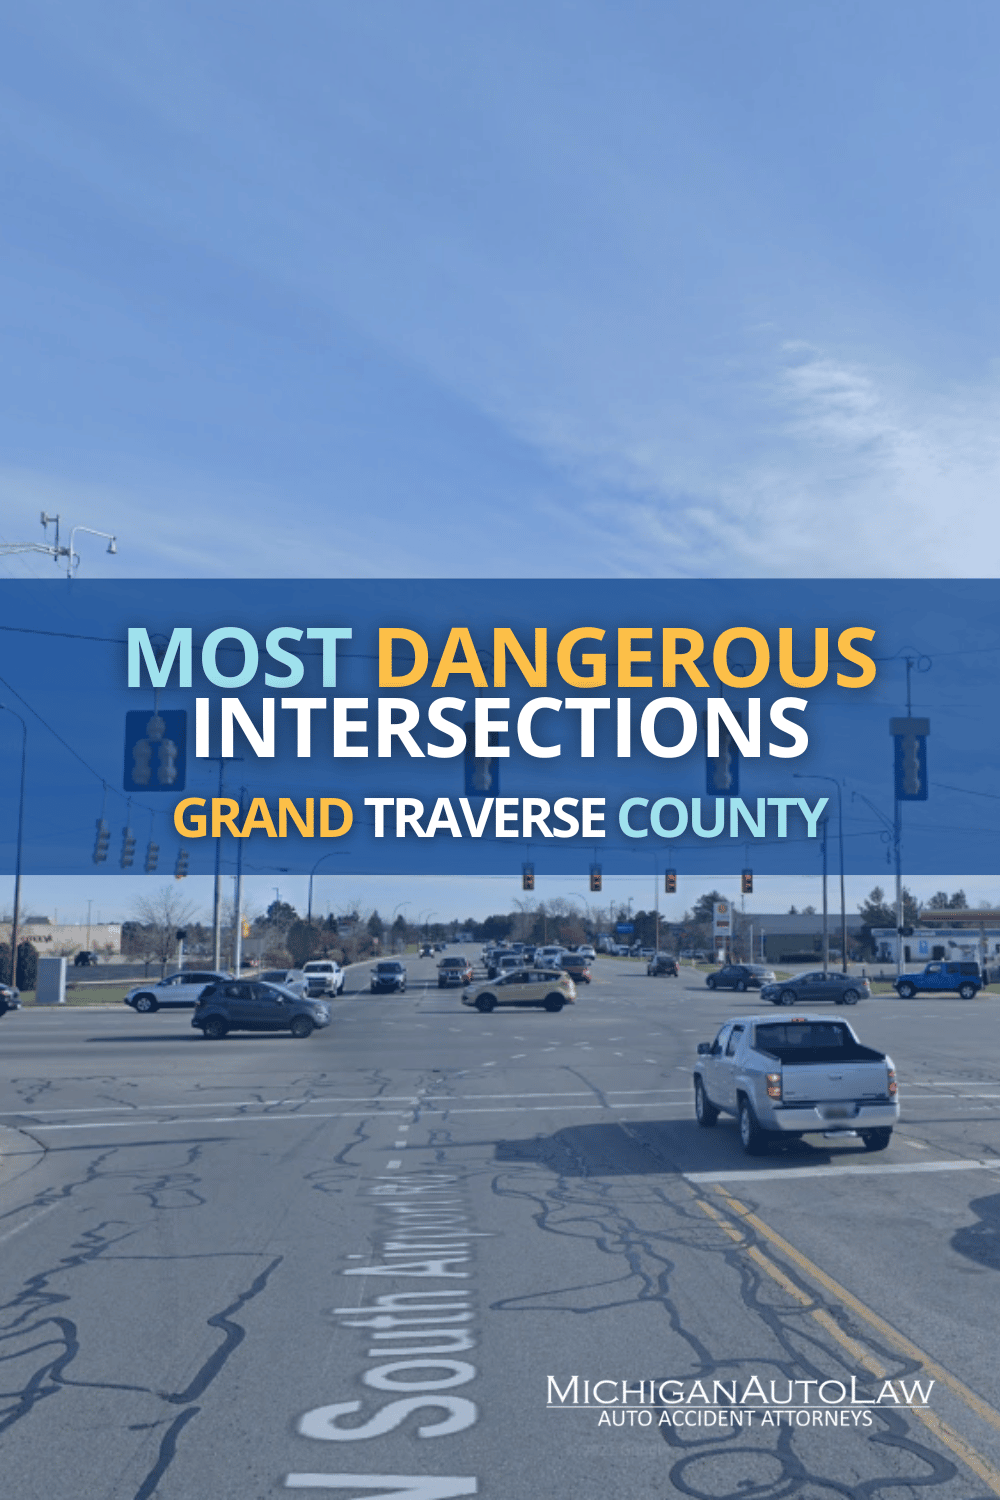 Grand Traverse County’s Most Dangerous Intersections in 2021